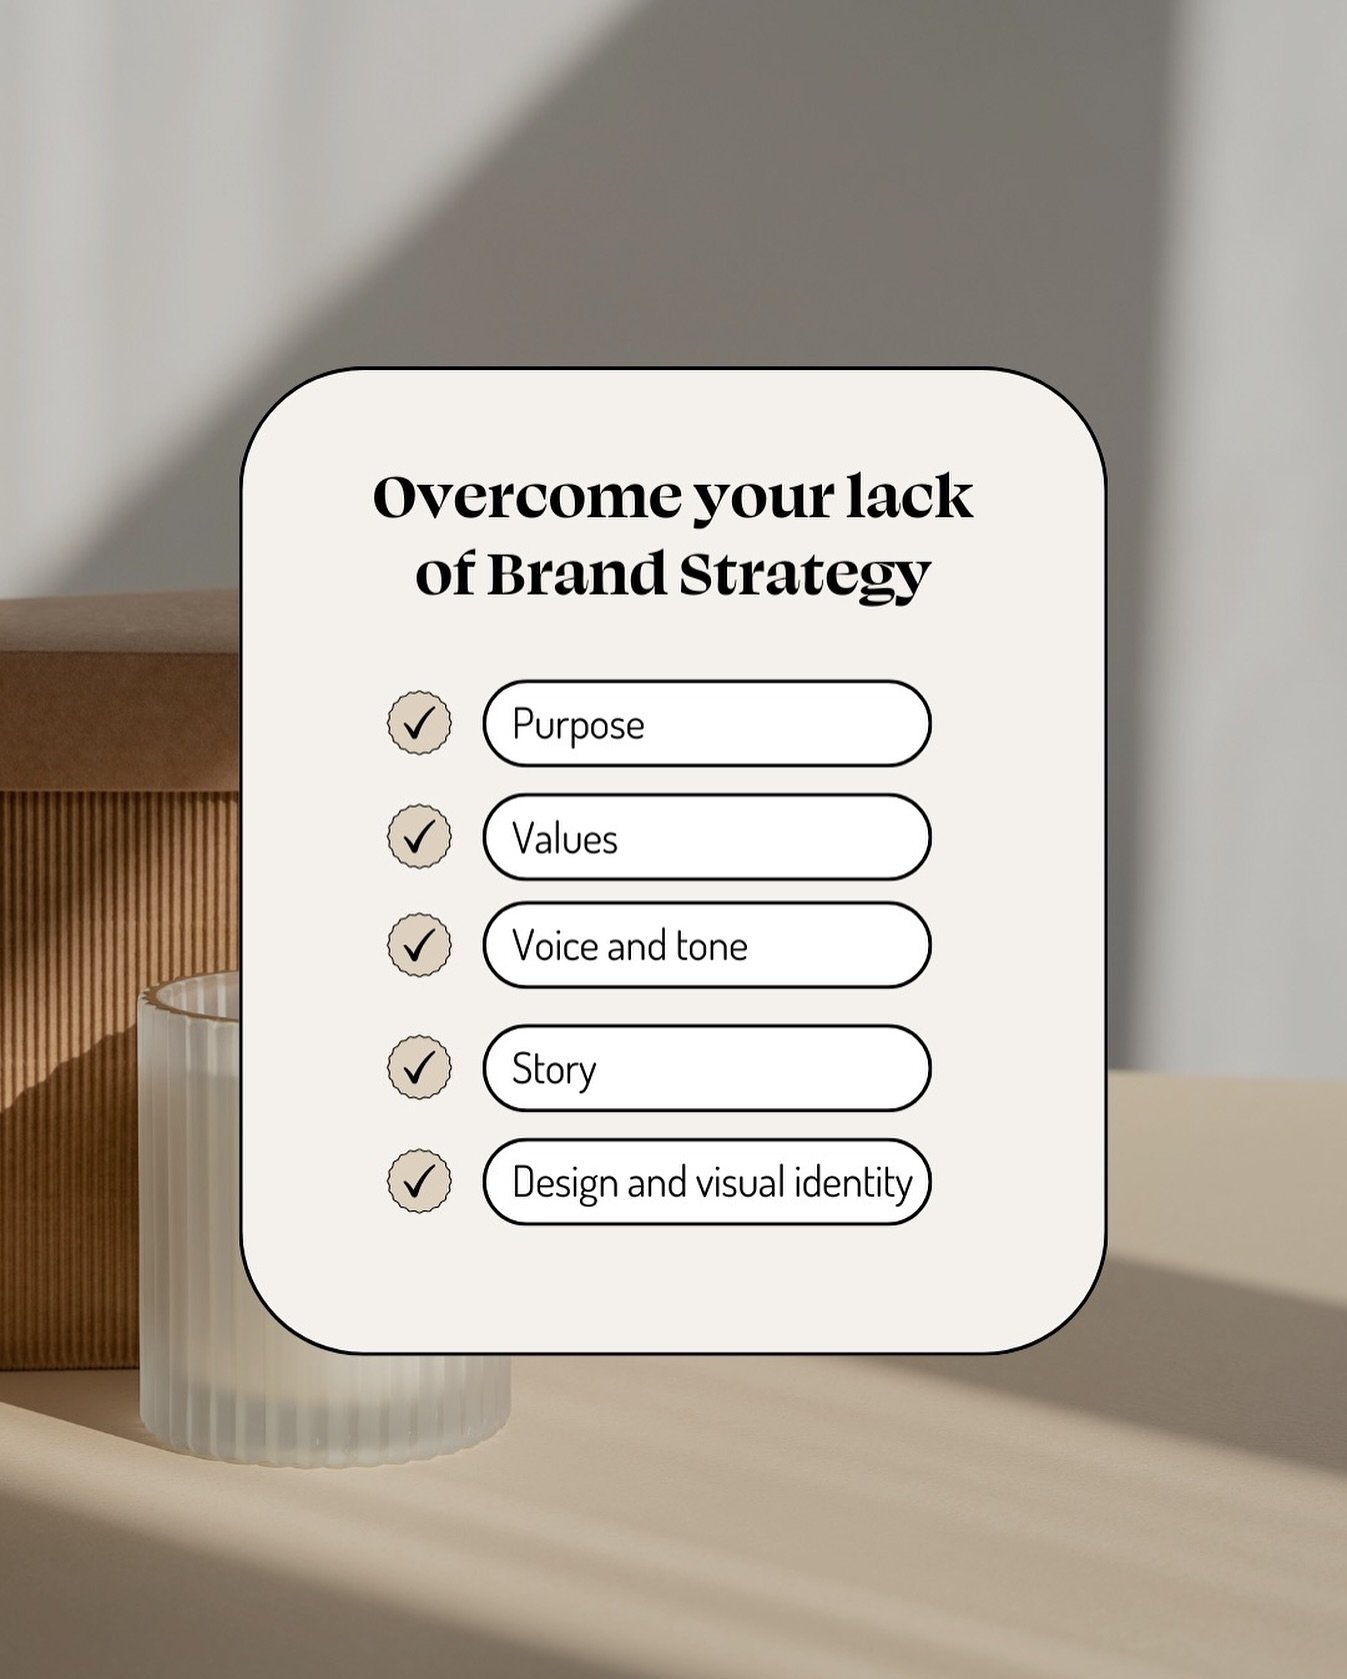 Steal our blueprint to a successful Brand Strategy 😎

Lacking a brand strategy is a common struggle for business owners, and we are here to help you fix it!

✨ Make sure you save this post to implement it.

Before you begin, you must answer the foll